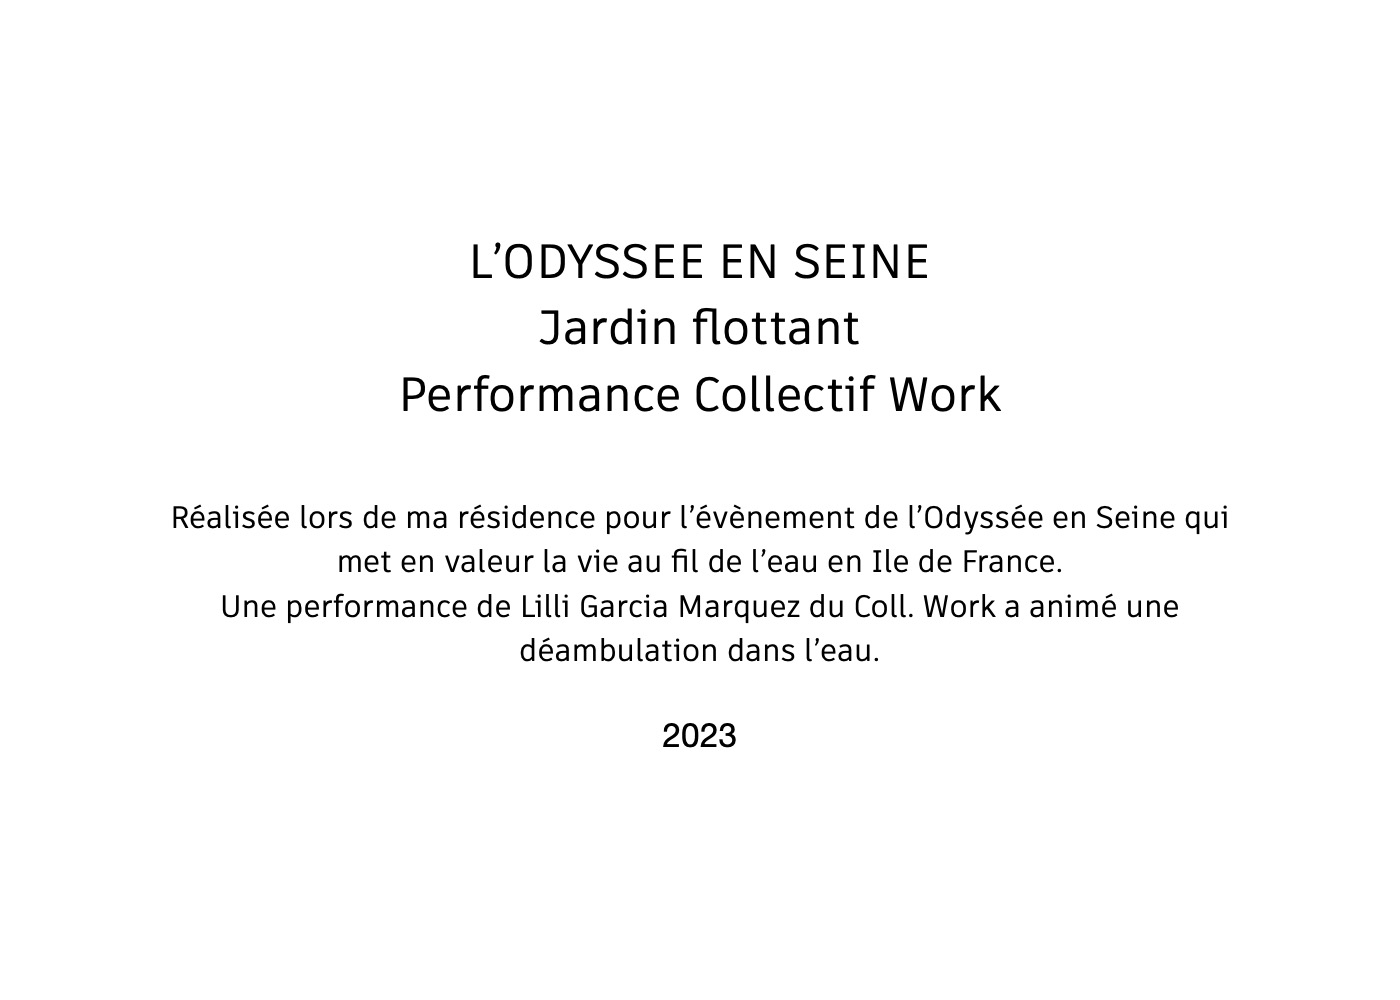 6 - Book titre section ODYSSEE 2023.jpg